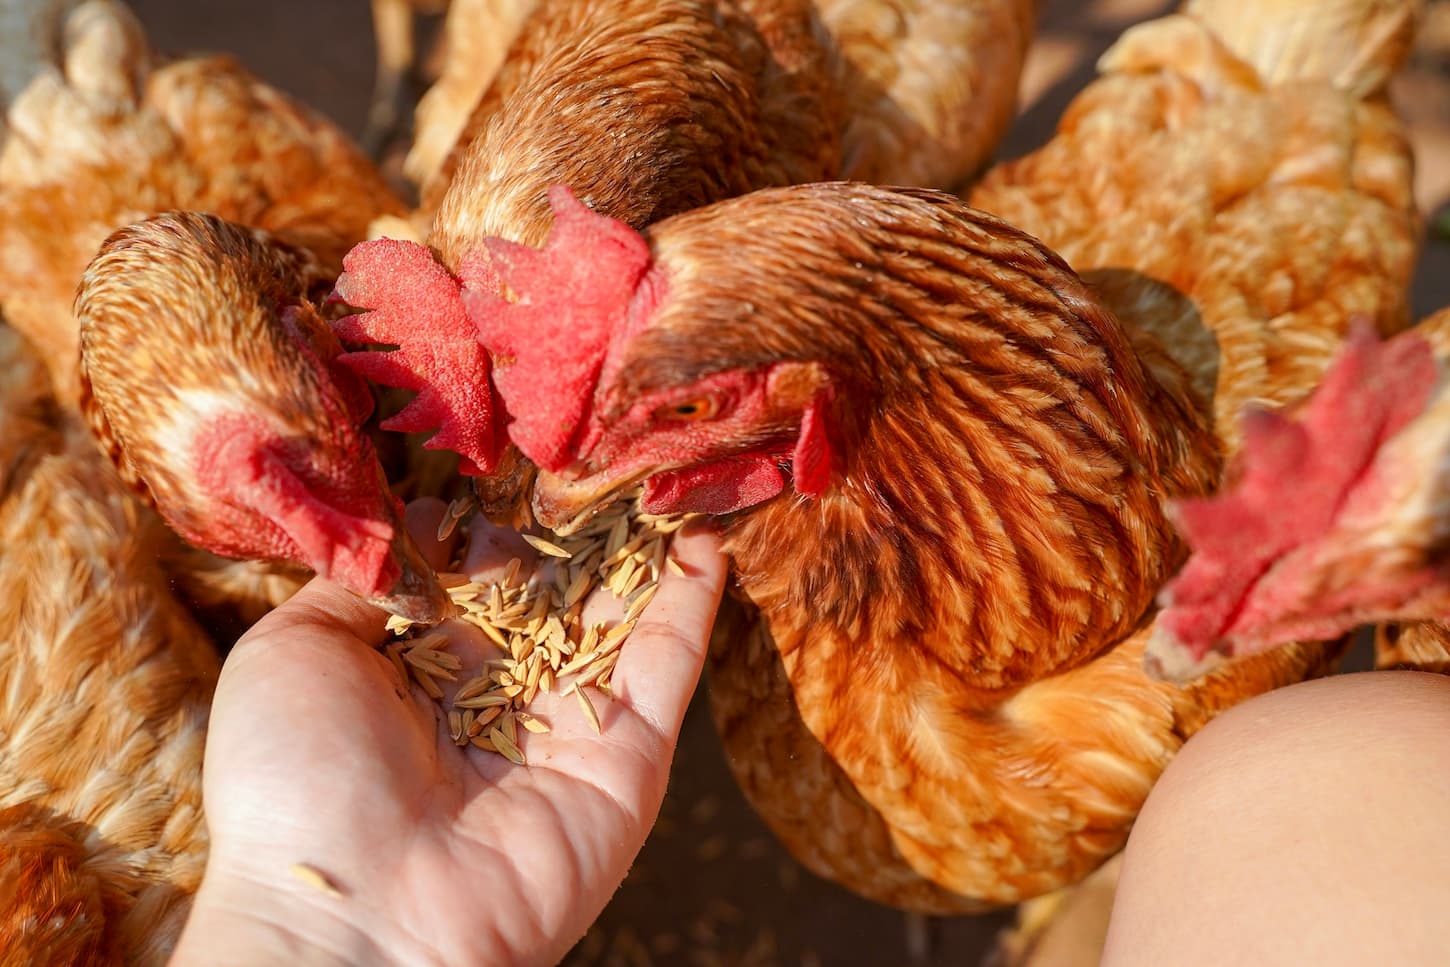 An image of chickens eating food from a woman's hand.